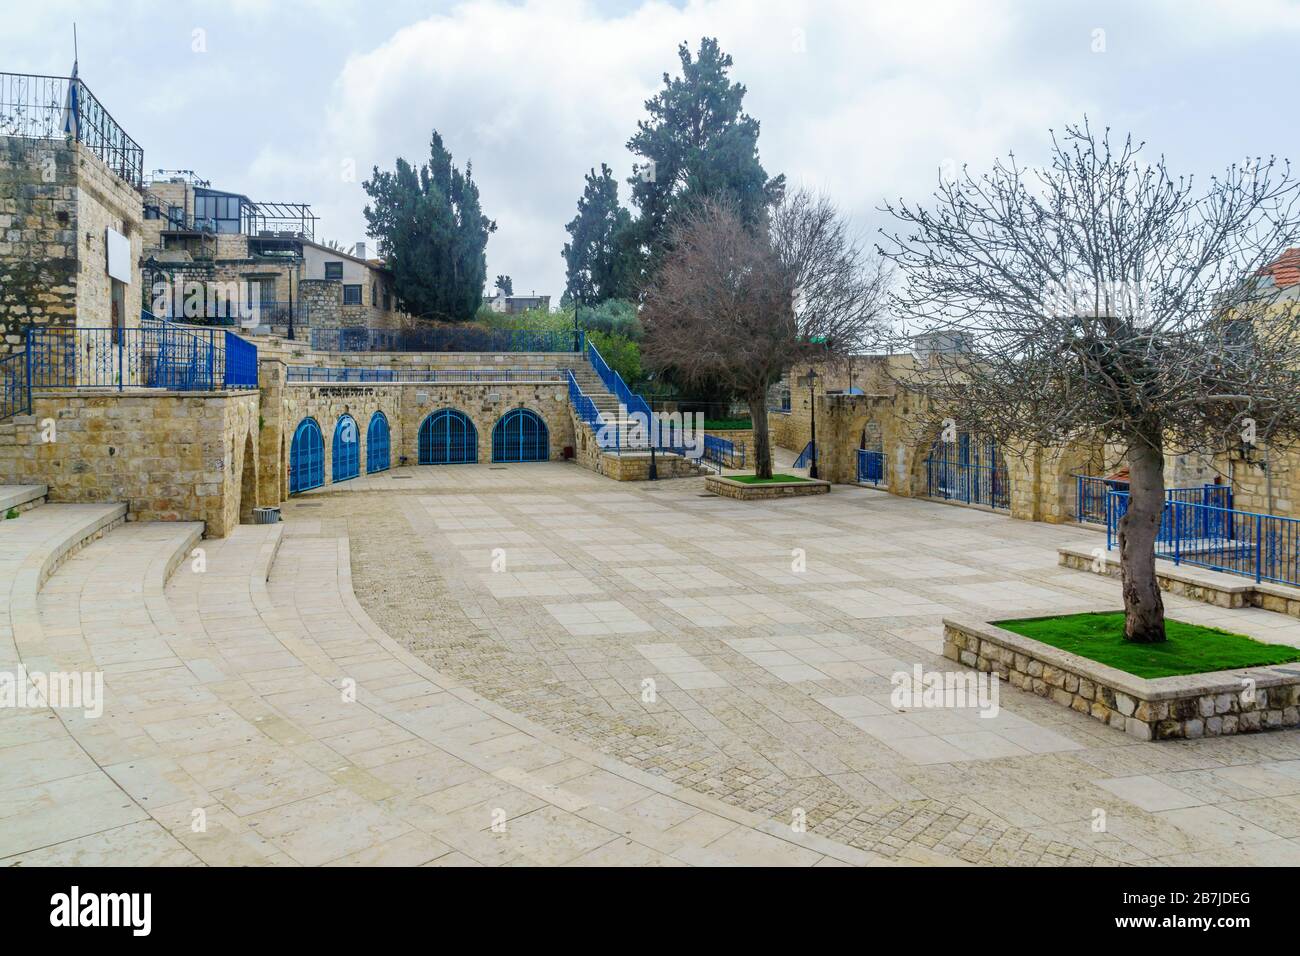 Safed, Israel - March 10, 2020: View of the sleeping spring compound in the Artists Quarter of the old city of Safed (Tzfat), Israel Stock Photo